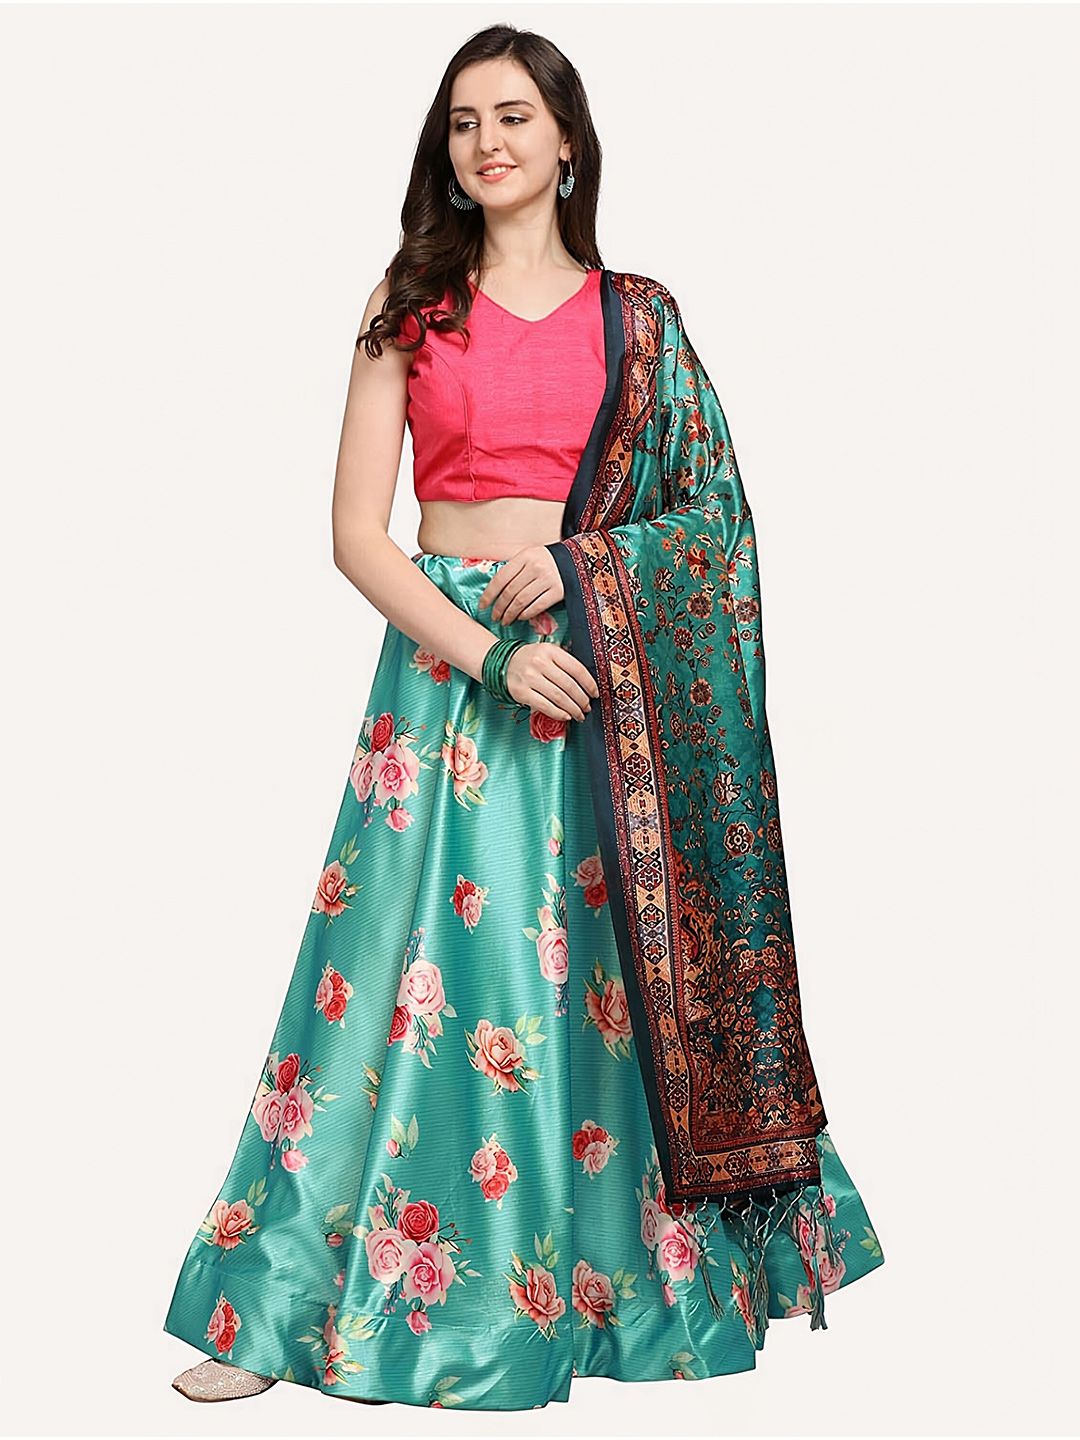 Kaizen TEXO FAB Teal Printed Semi-Stitched Lehenga & Unstitched Blouse With Dupatta Price in India